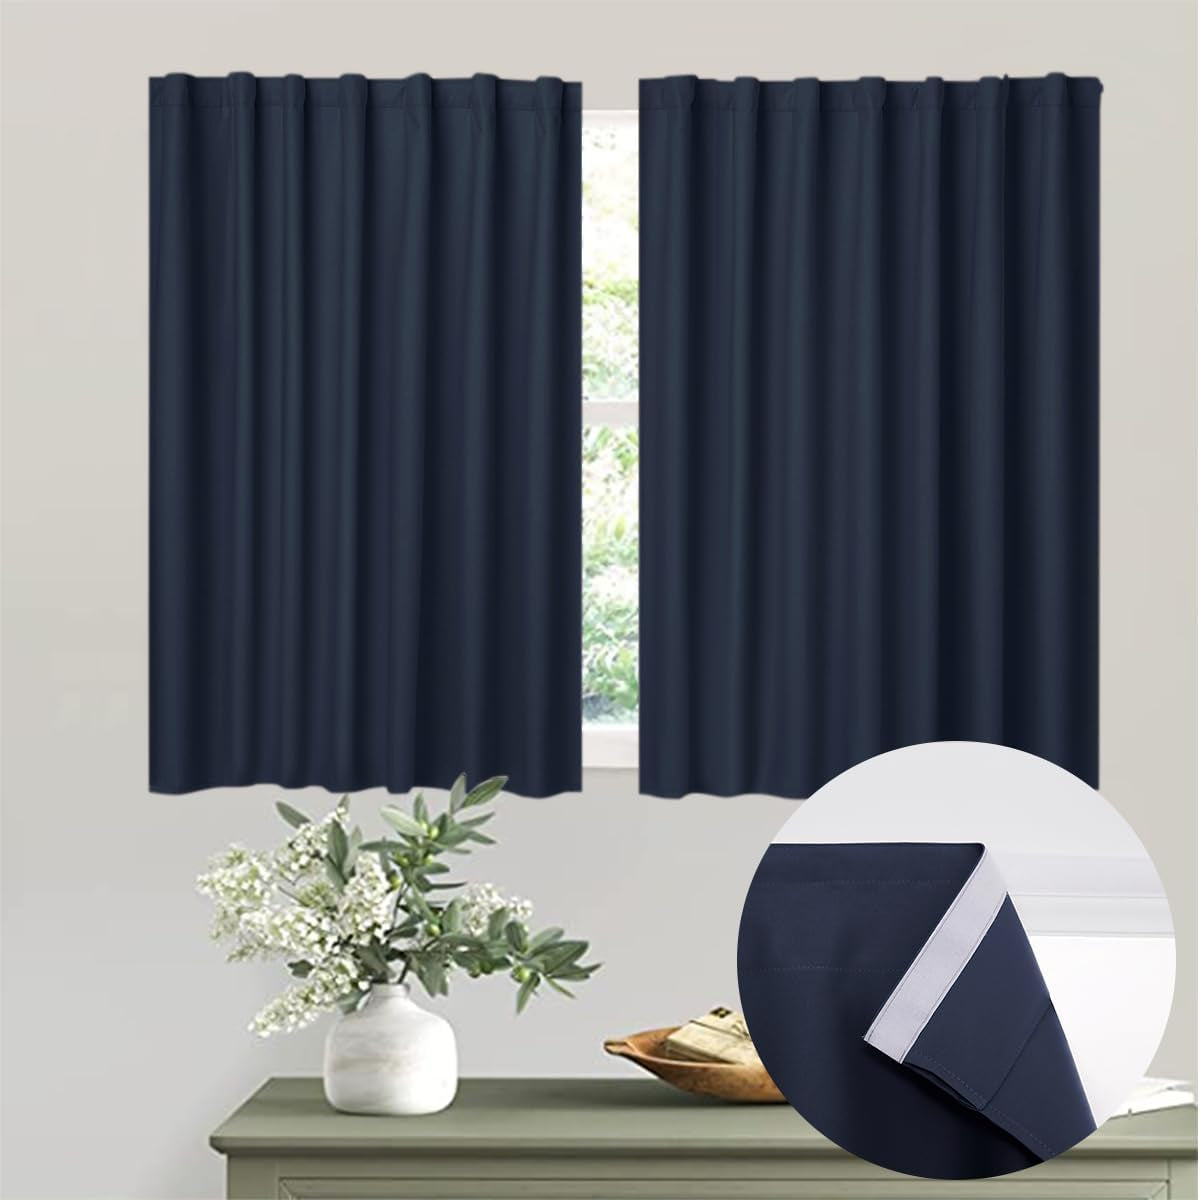 Muamar 2Pcs Blackout Curtains Privacy Curtains 63 Inch Length Window Curtains,Easy Install Thermal Insulated Window Shades,Stick Curtains No Rods, Black 42" W X 63" L  Muamar Navy Blue 29"W X 36"L 